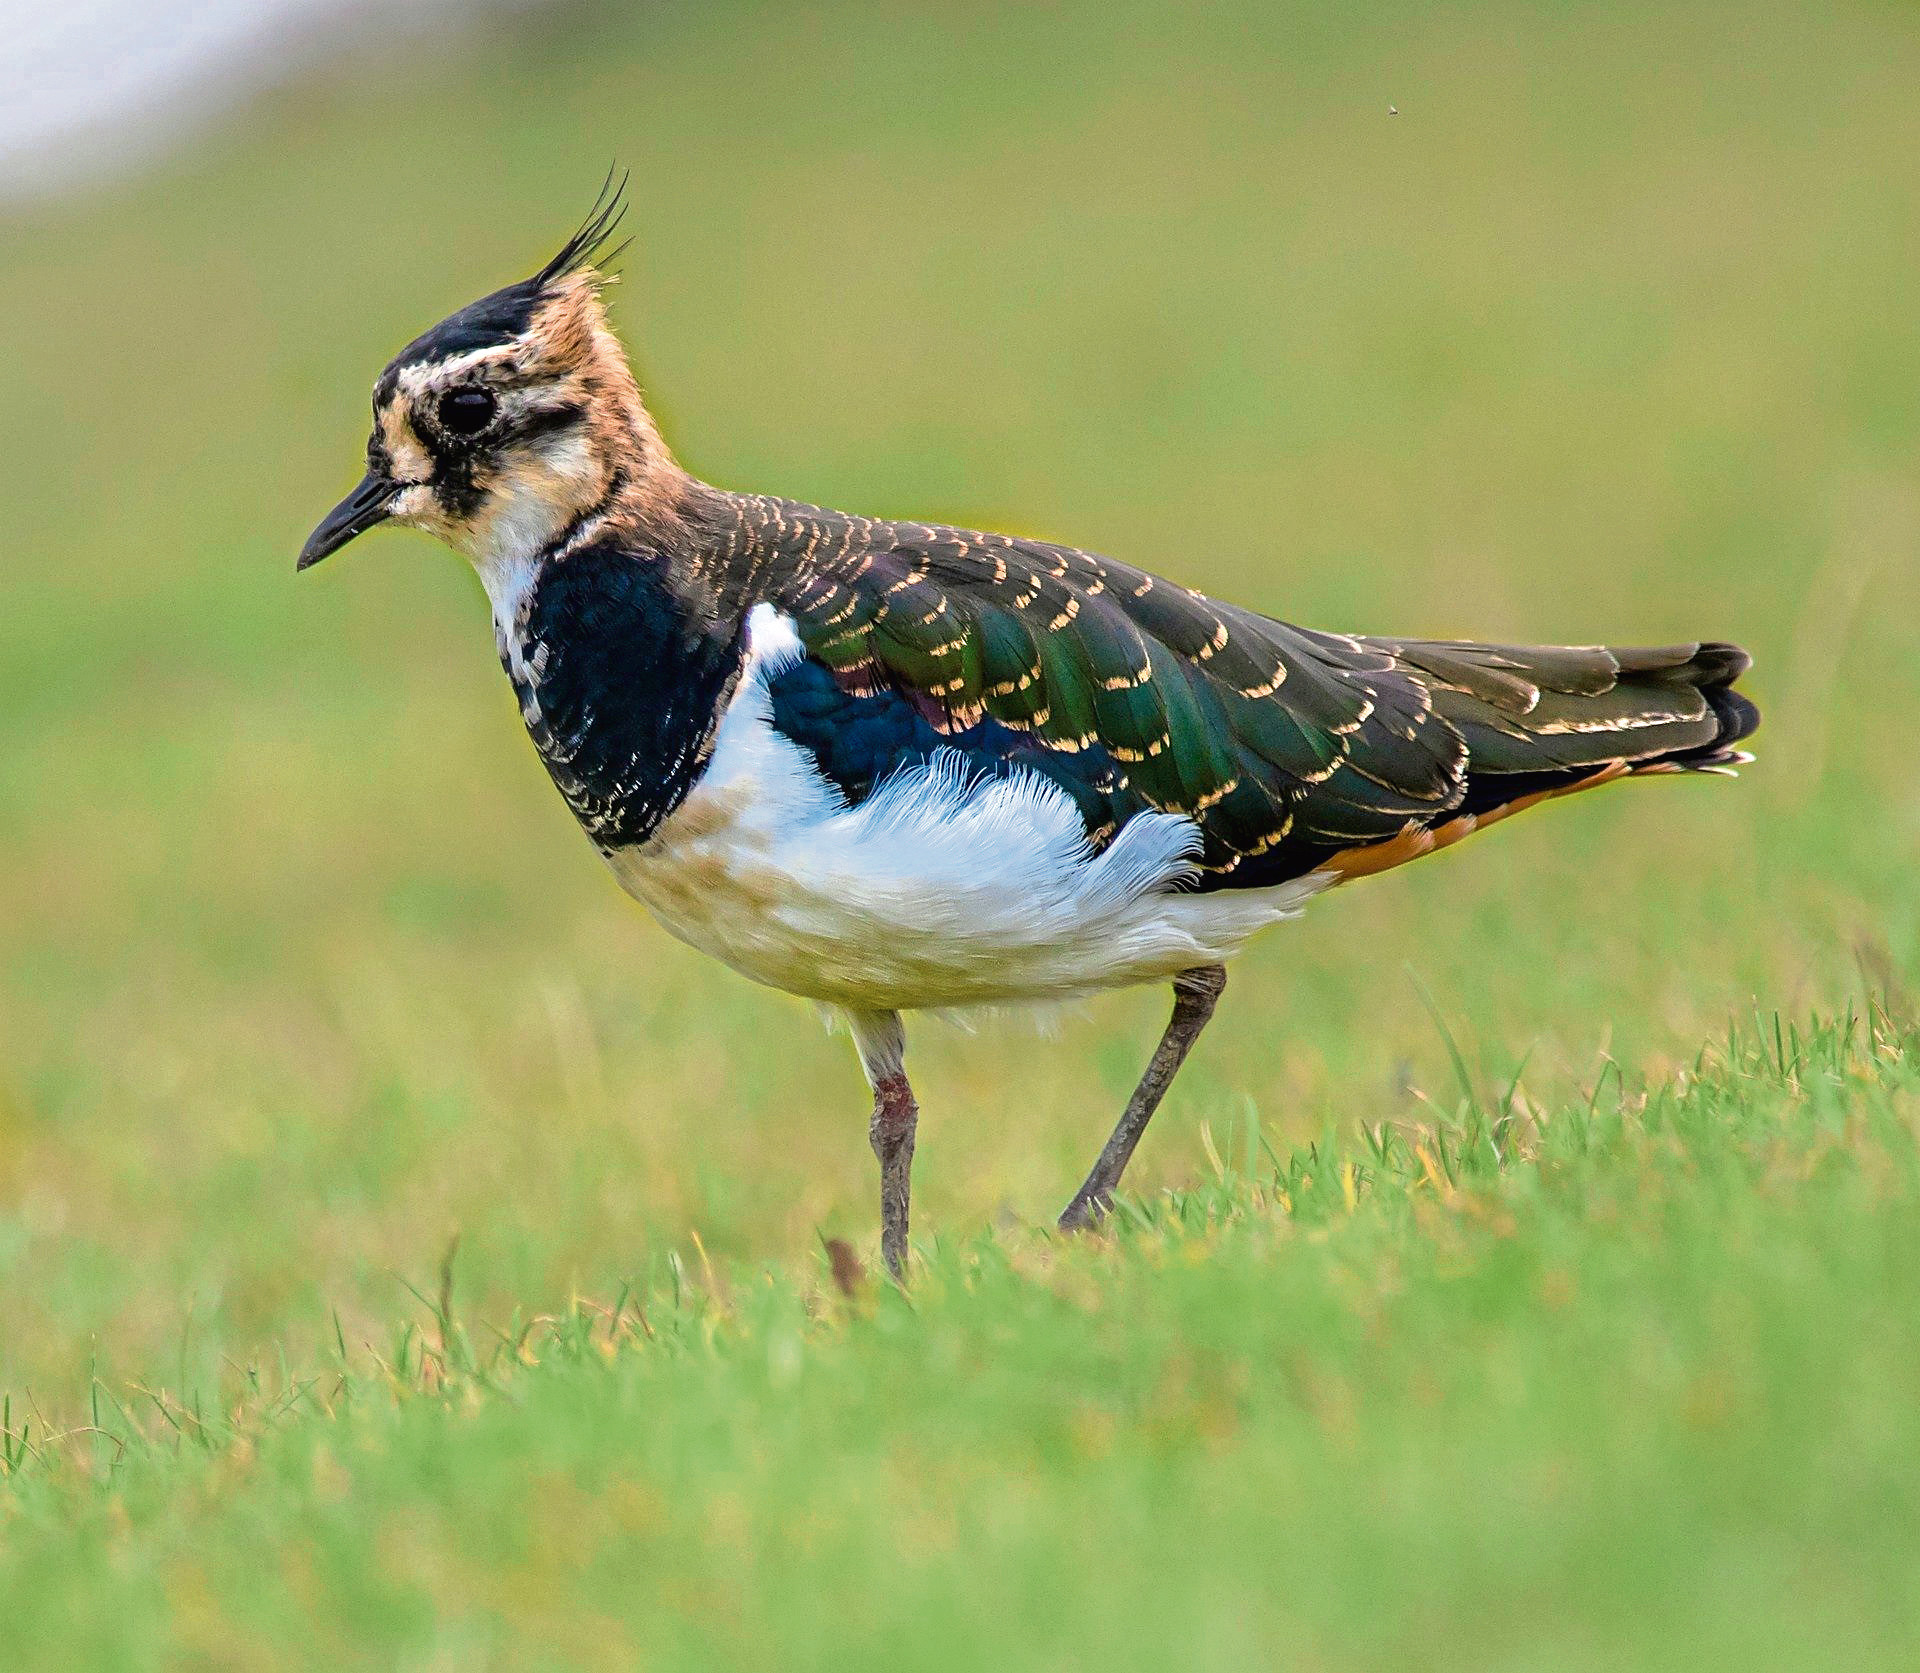 A lapwing, one of Scotland's ground-nesting birds which can be disturbed by people behaving irresponsibly in nature. Image: SRUC.